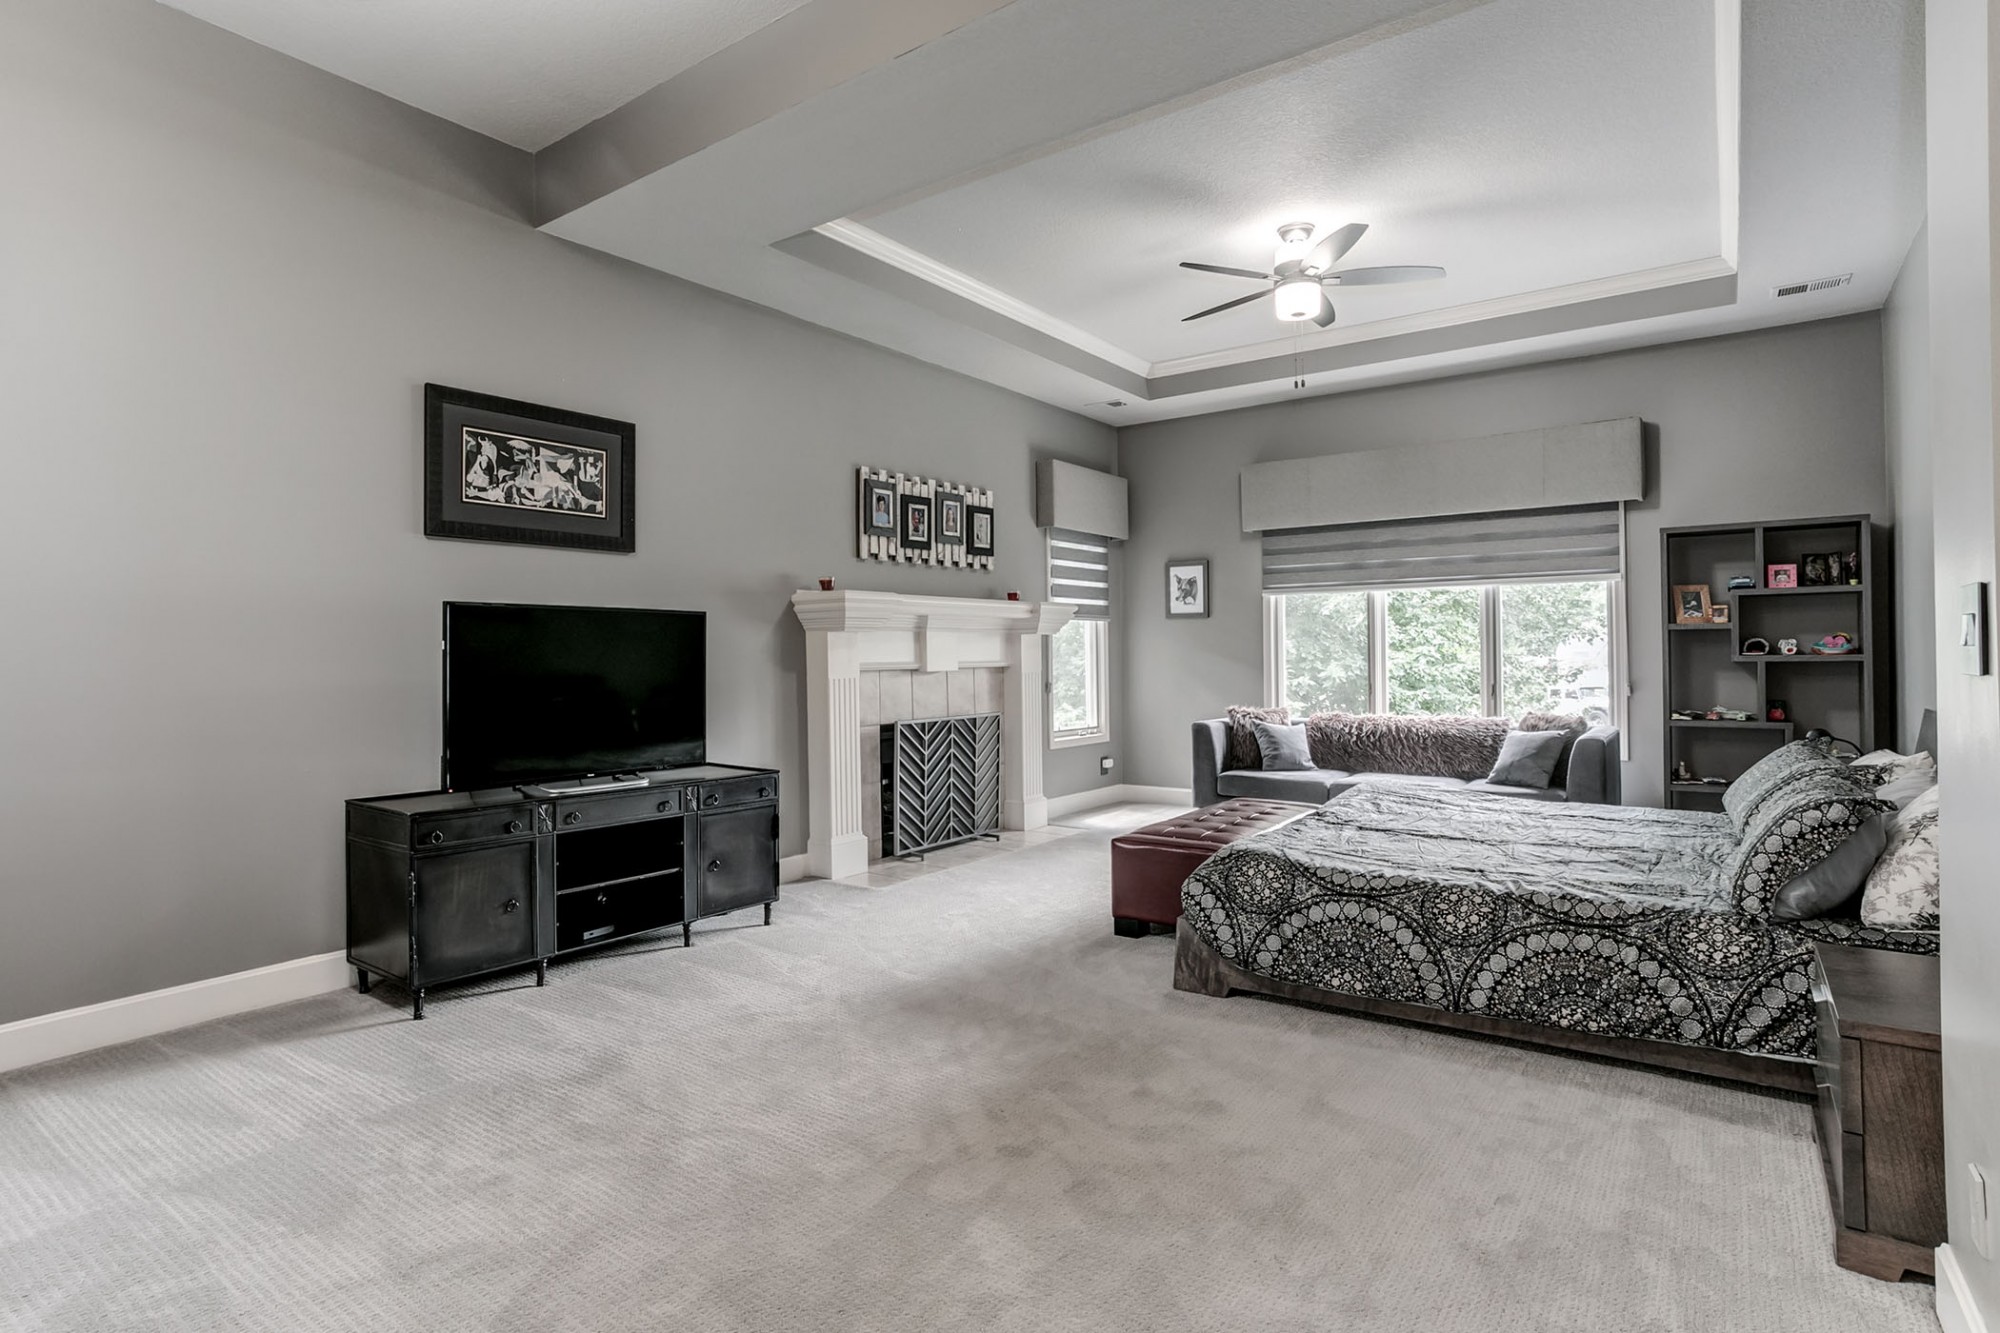 Updated and massive master suite with fireplace and high-end window treatments.